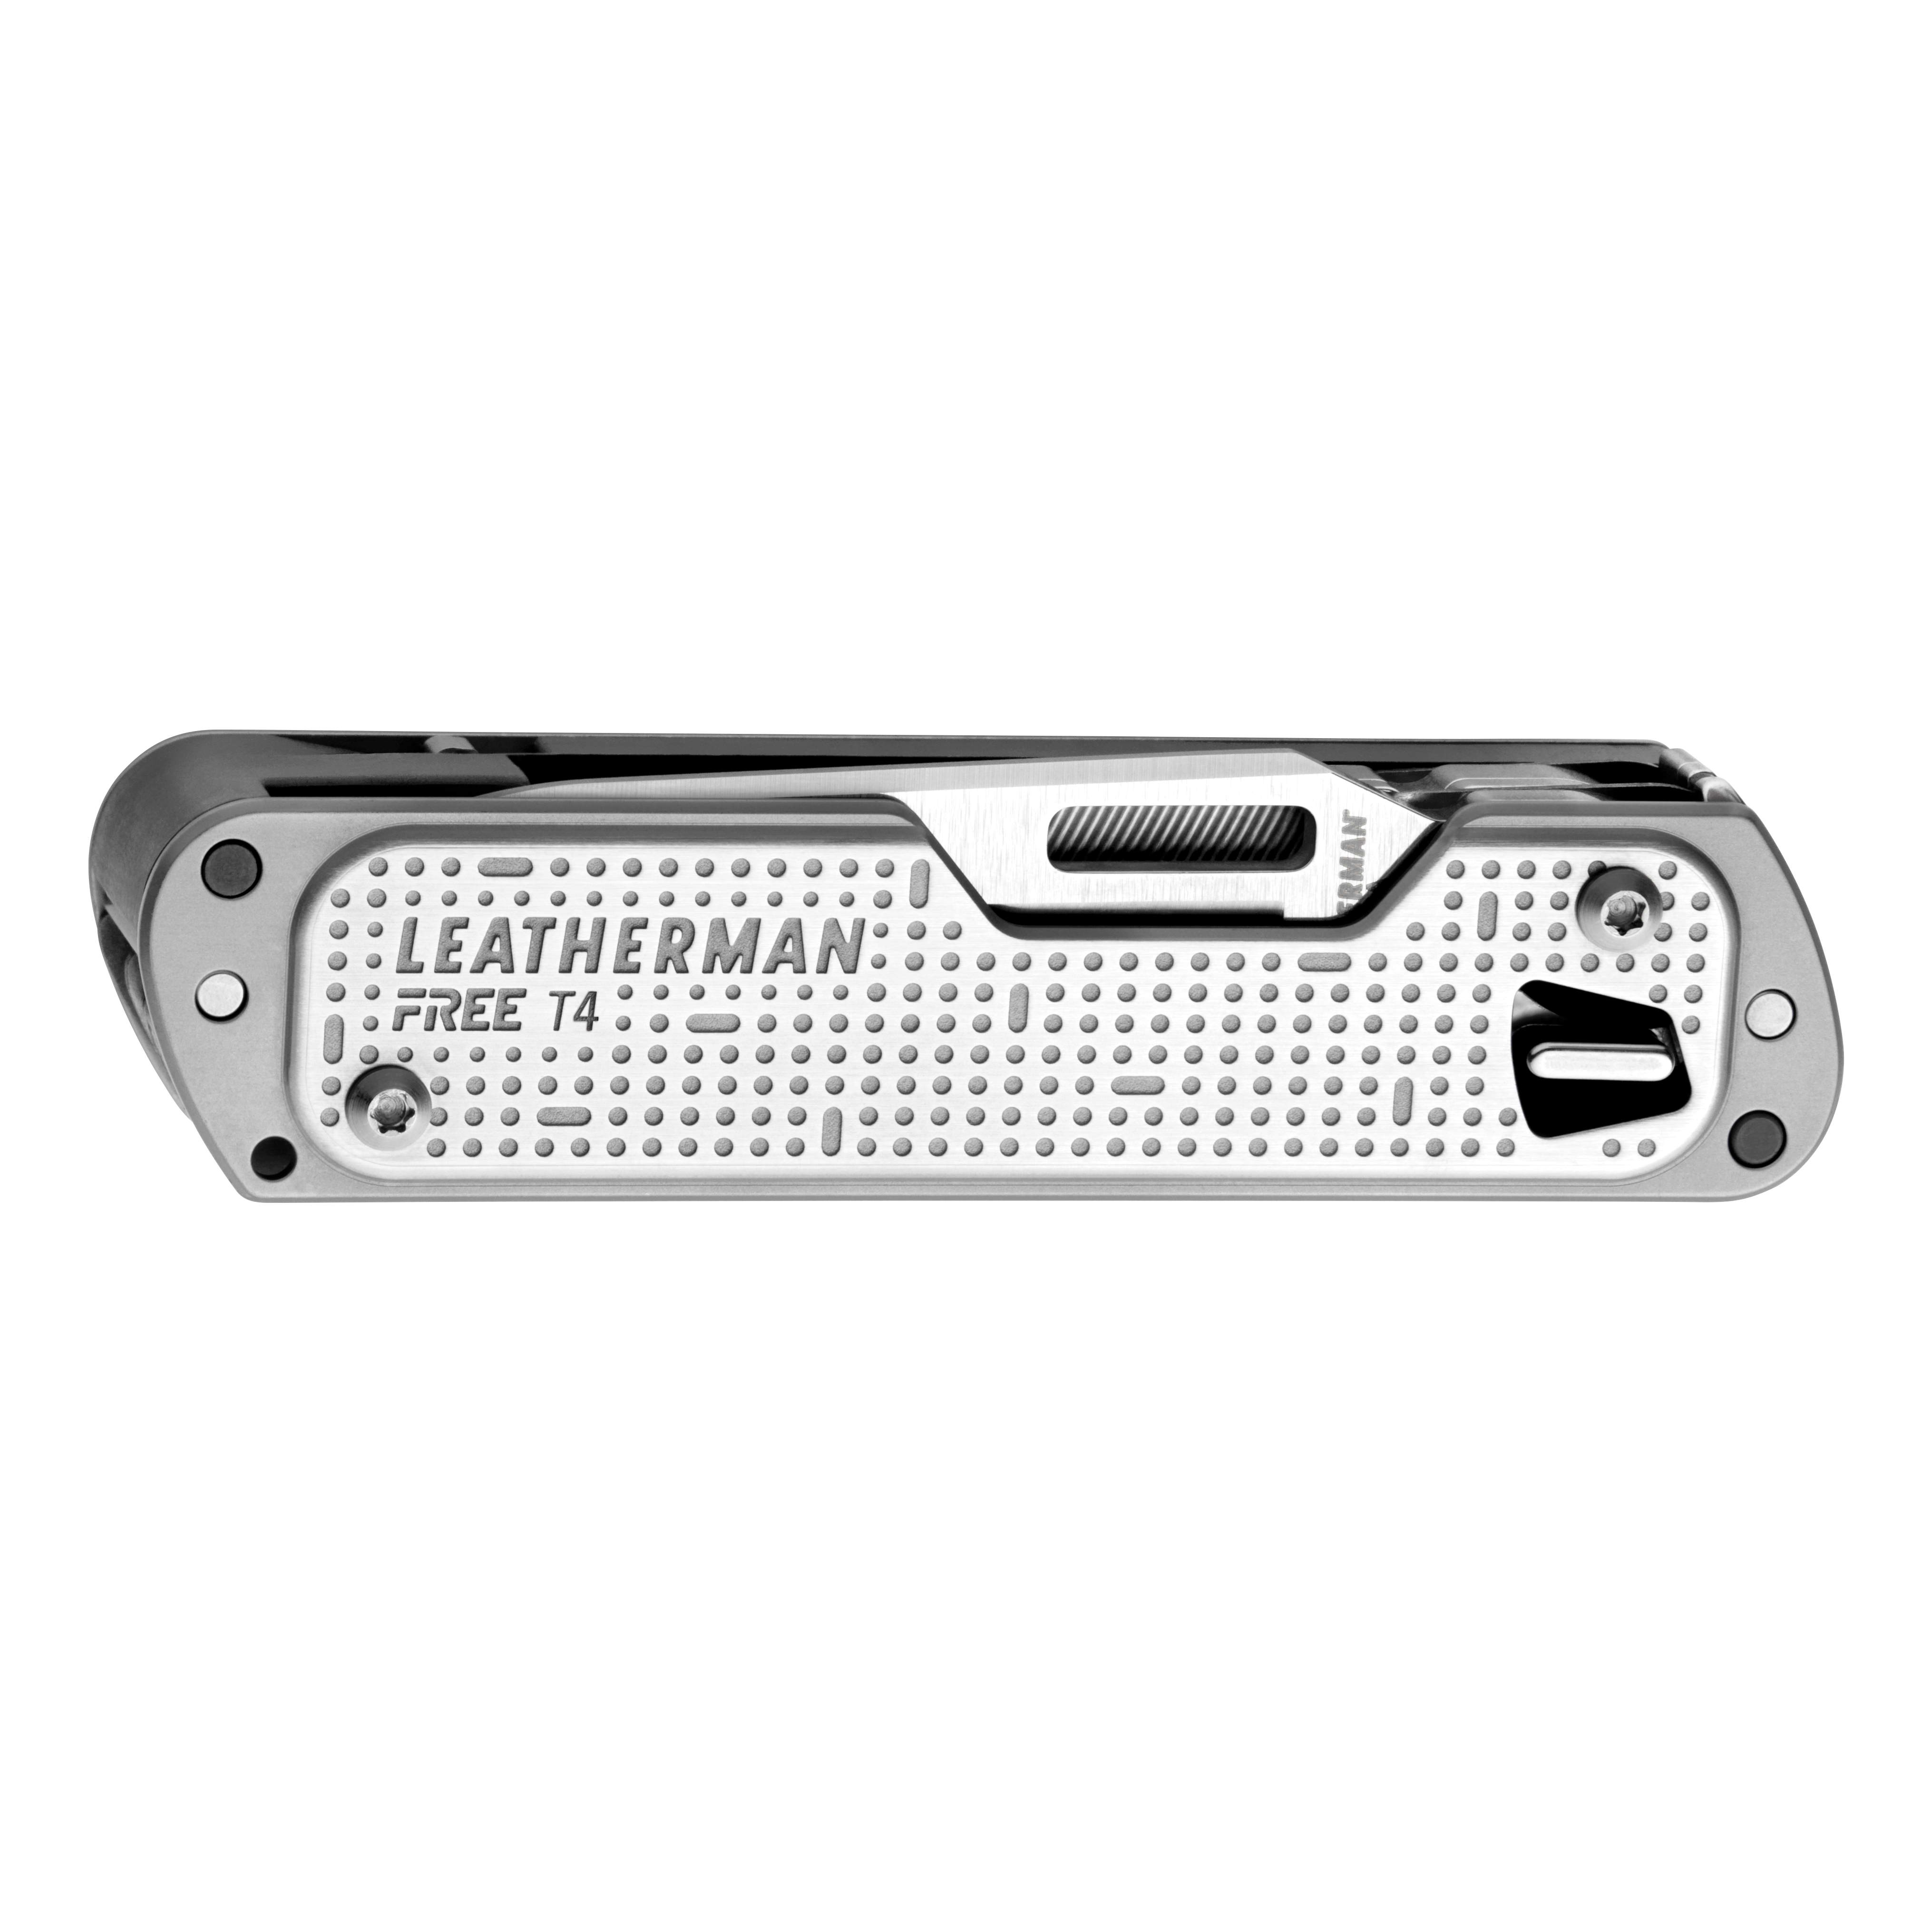 Leatherman® FREE™ T4 Knife Tool - Closed View